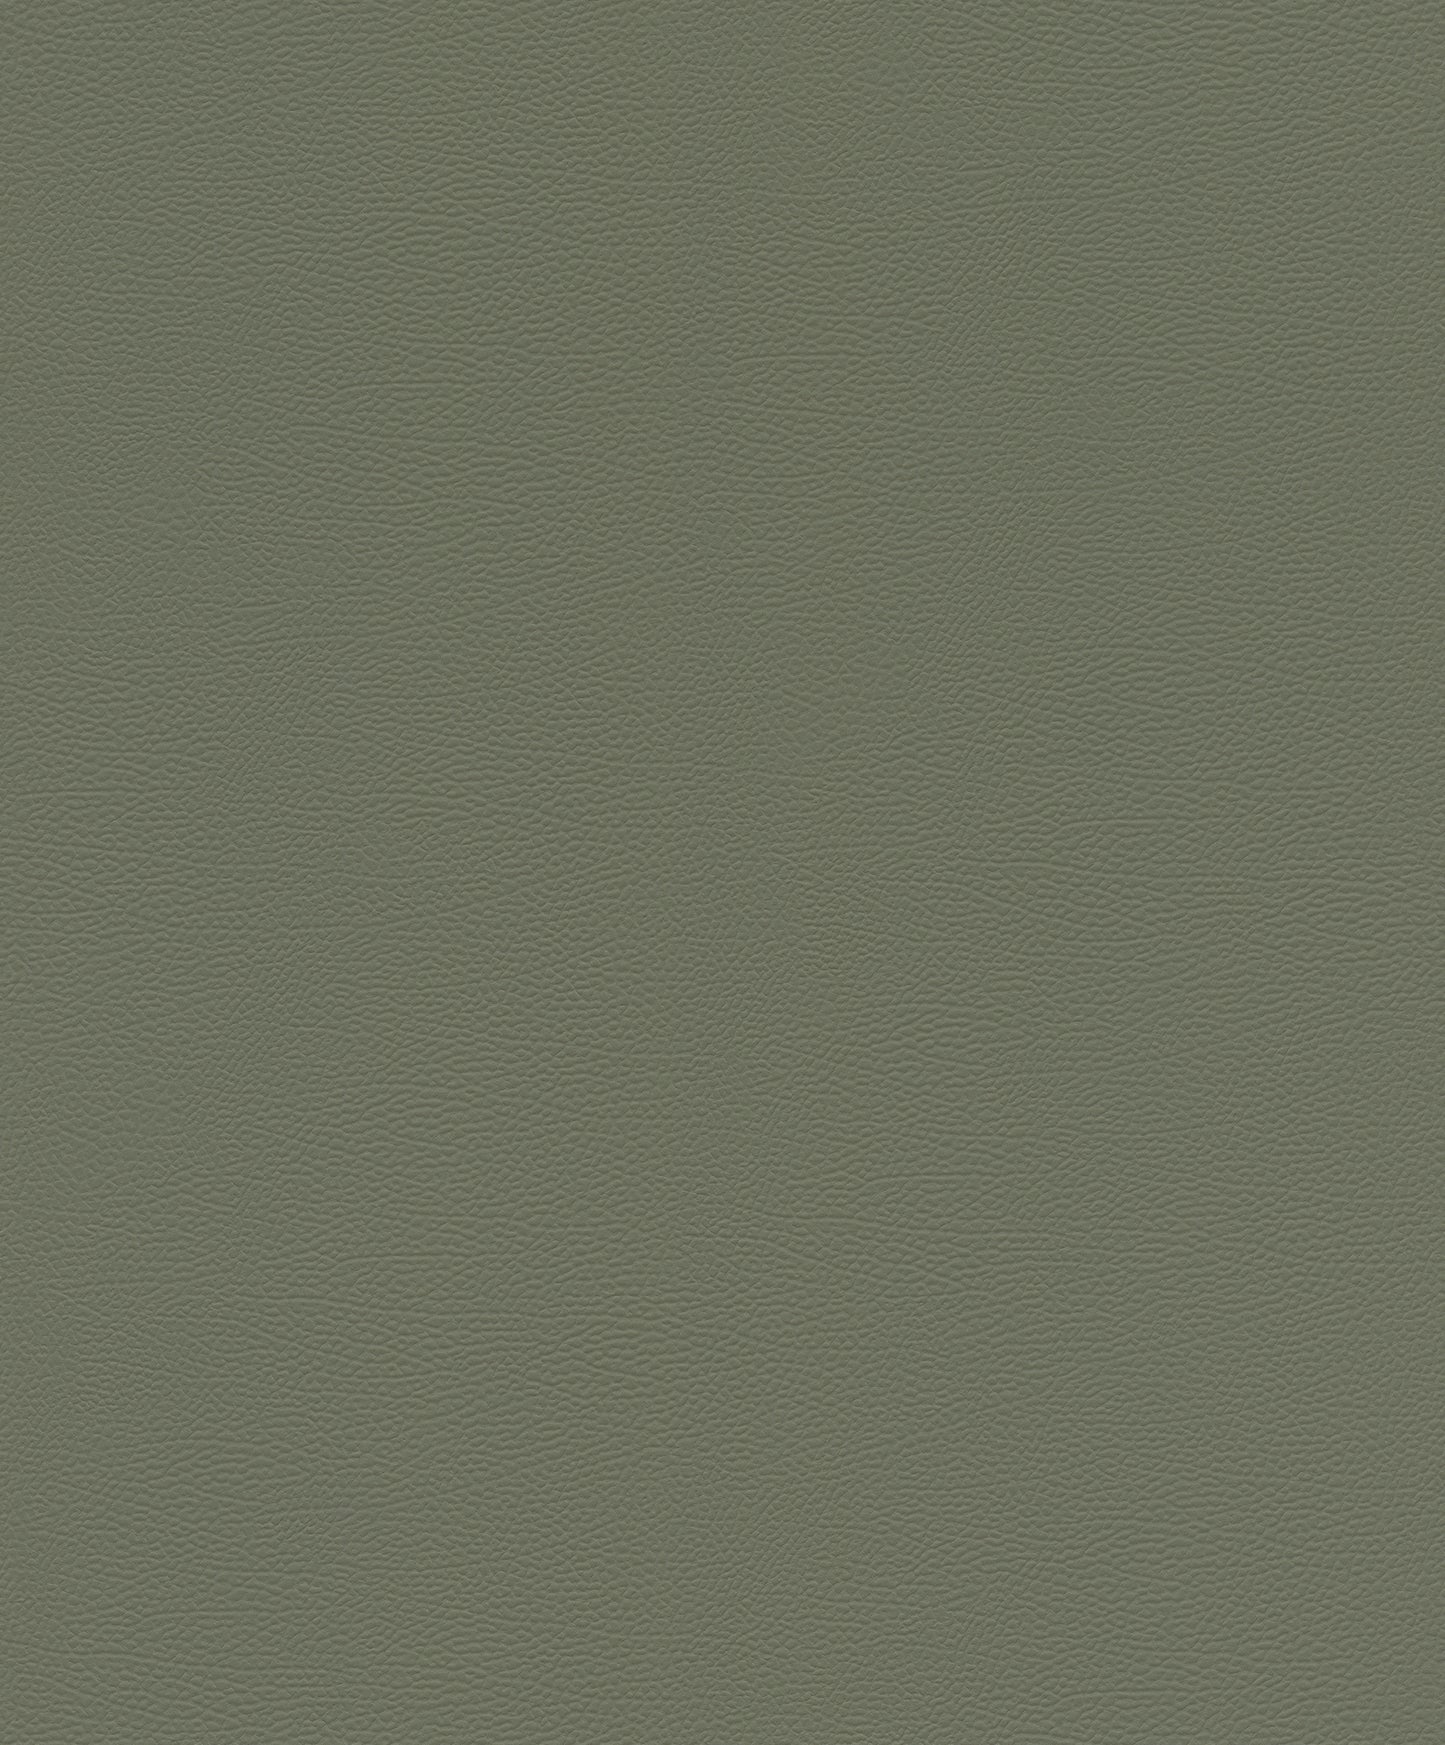 Leather Plain Texture Green